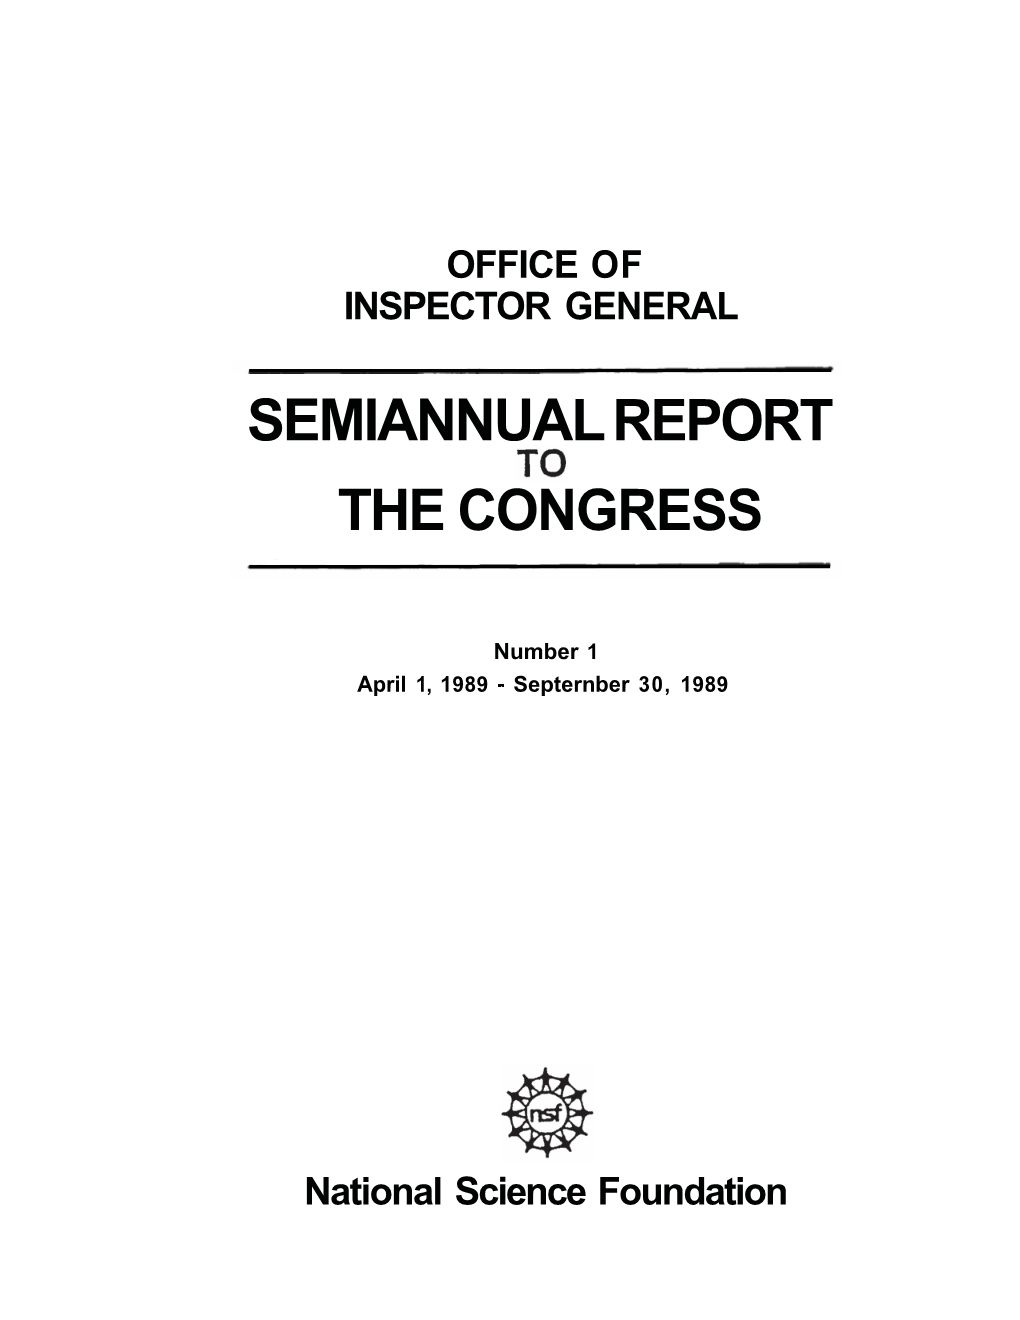 Excerpts of Semiannual Reports to Congress